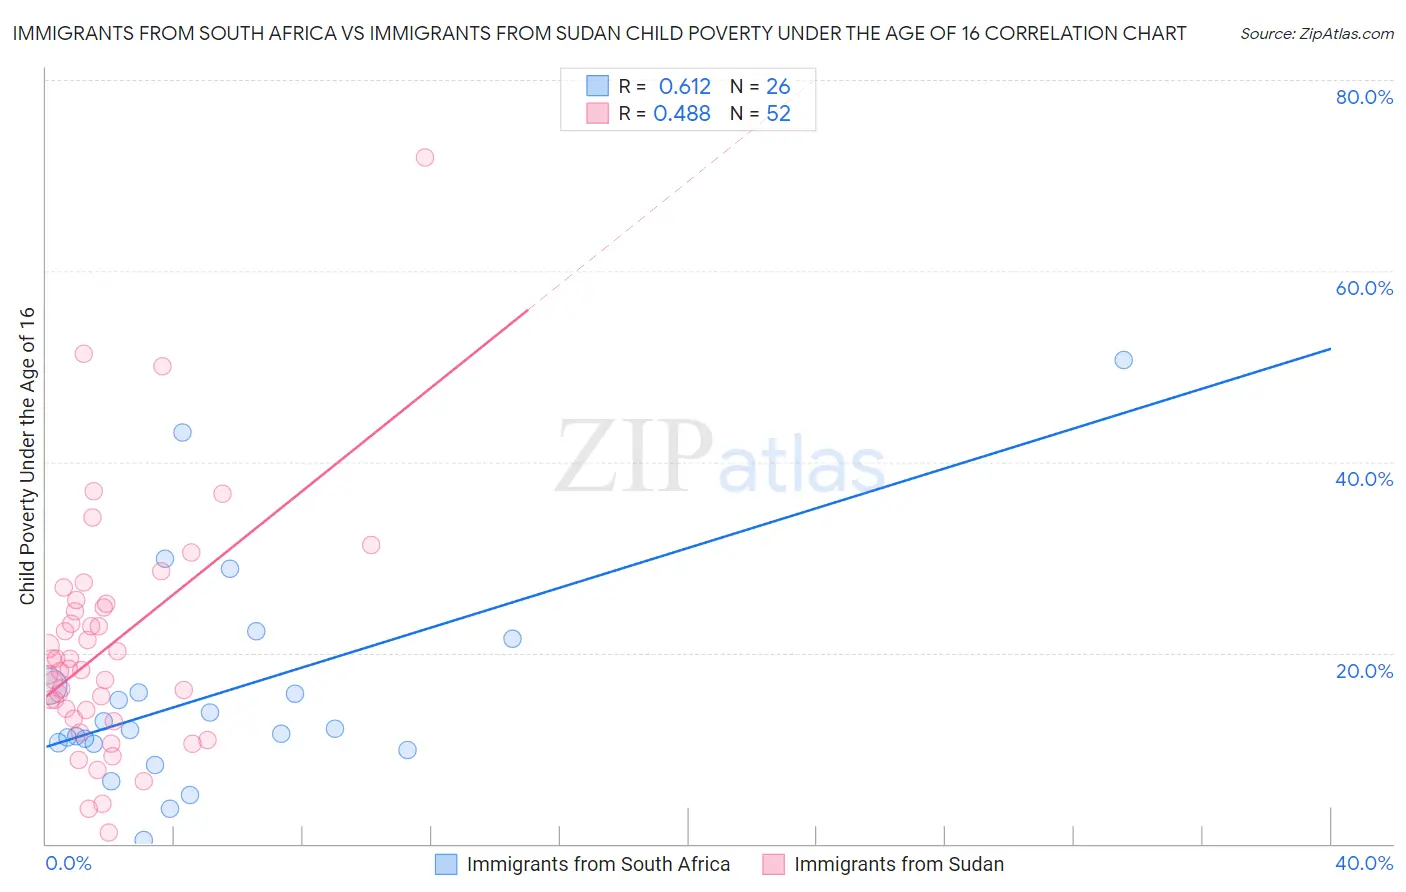 Immigrants from South Africa vs Immigrants from Sudan Child Poverty Under the Age of 16